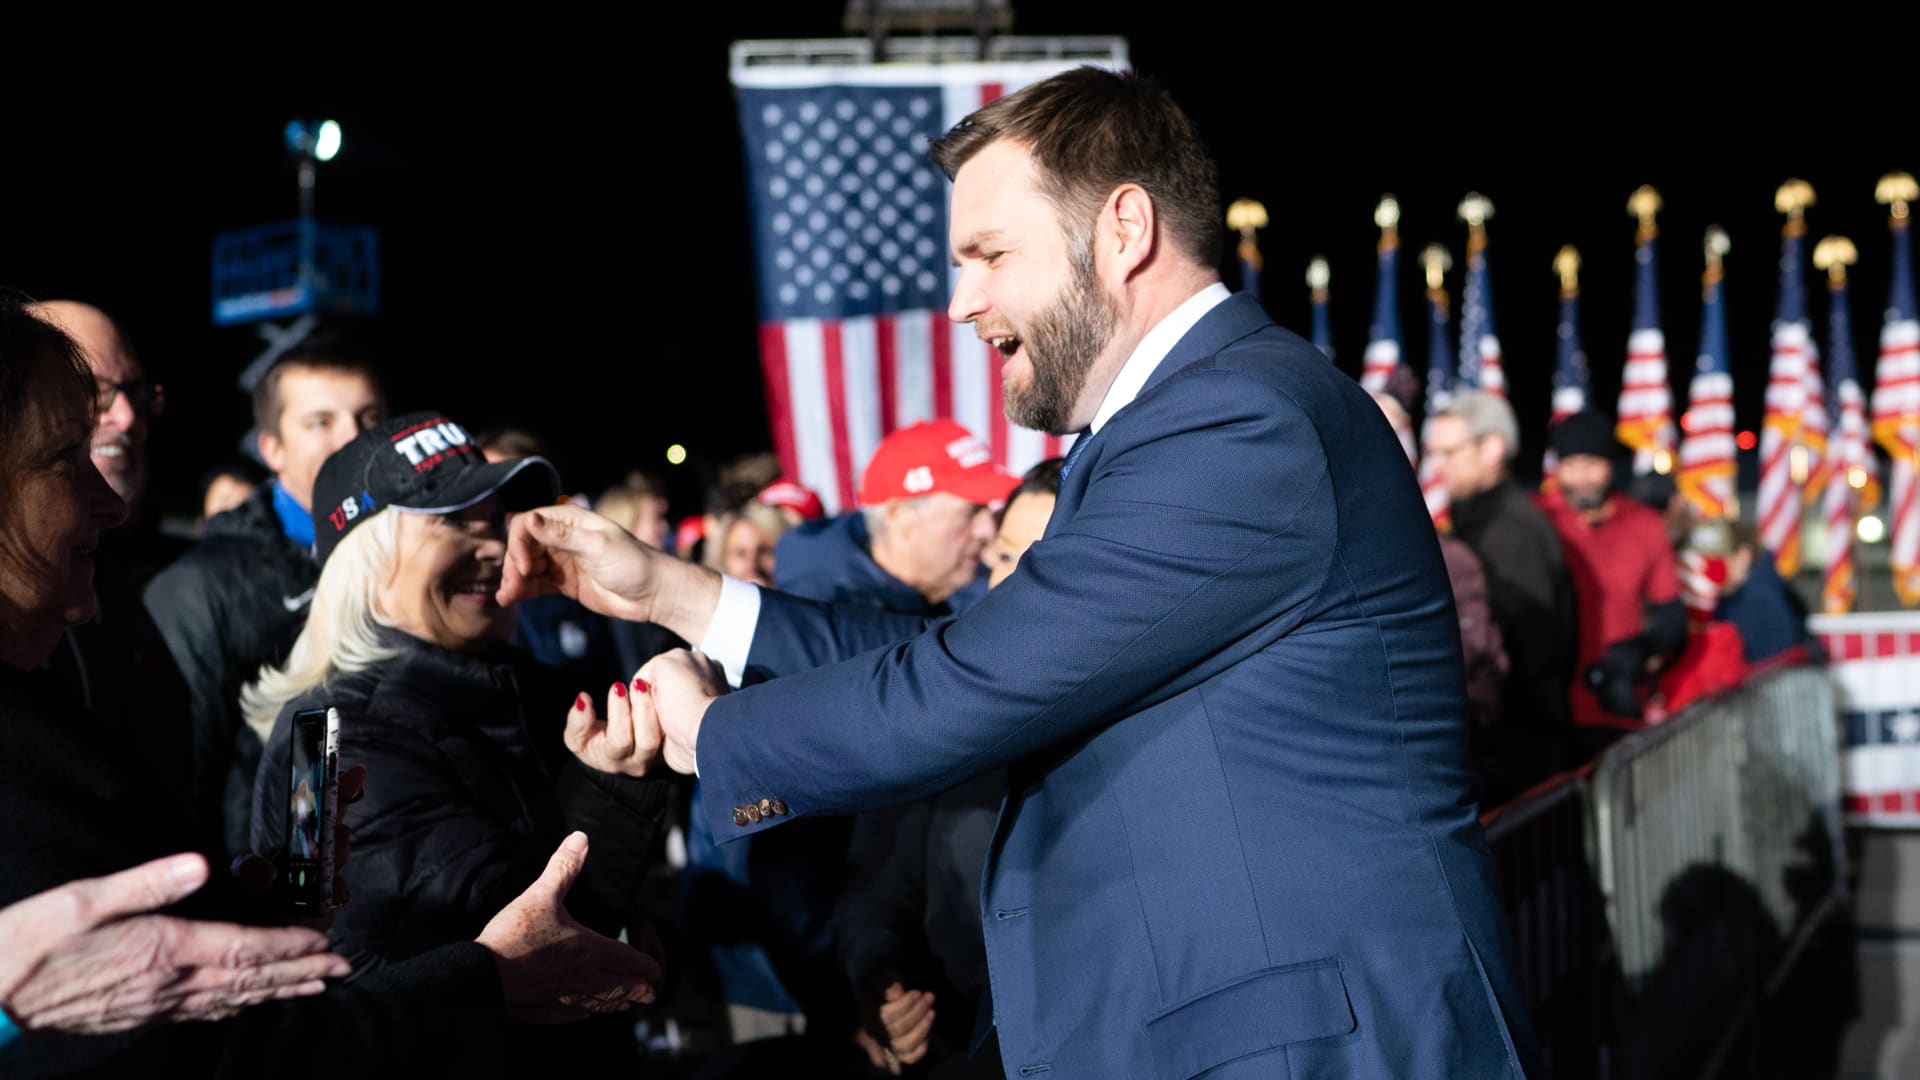 VANDALIA, OH - NOVEMBER 7: J.D. Vance, Republican candidate for the 2022 United States Senate election in Ohio meets the crowd after speaking. Donald Trumps Save America Rally was held in Vandalia, Ohio on Monday, November 07, 2022. (Photo by Sarah L. Voisin/The Washington Post via Getty Images)